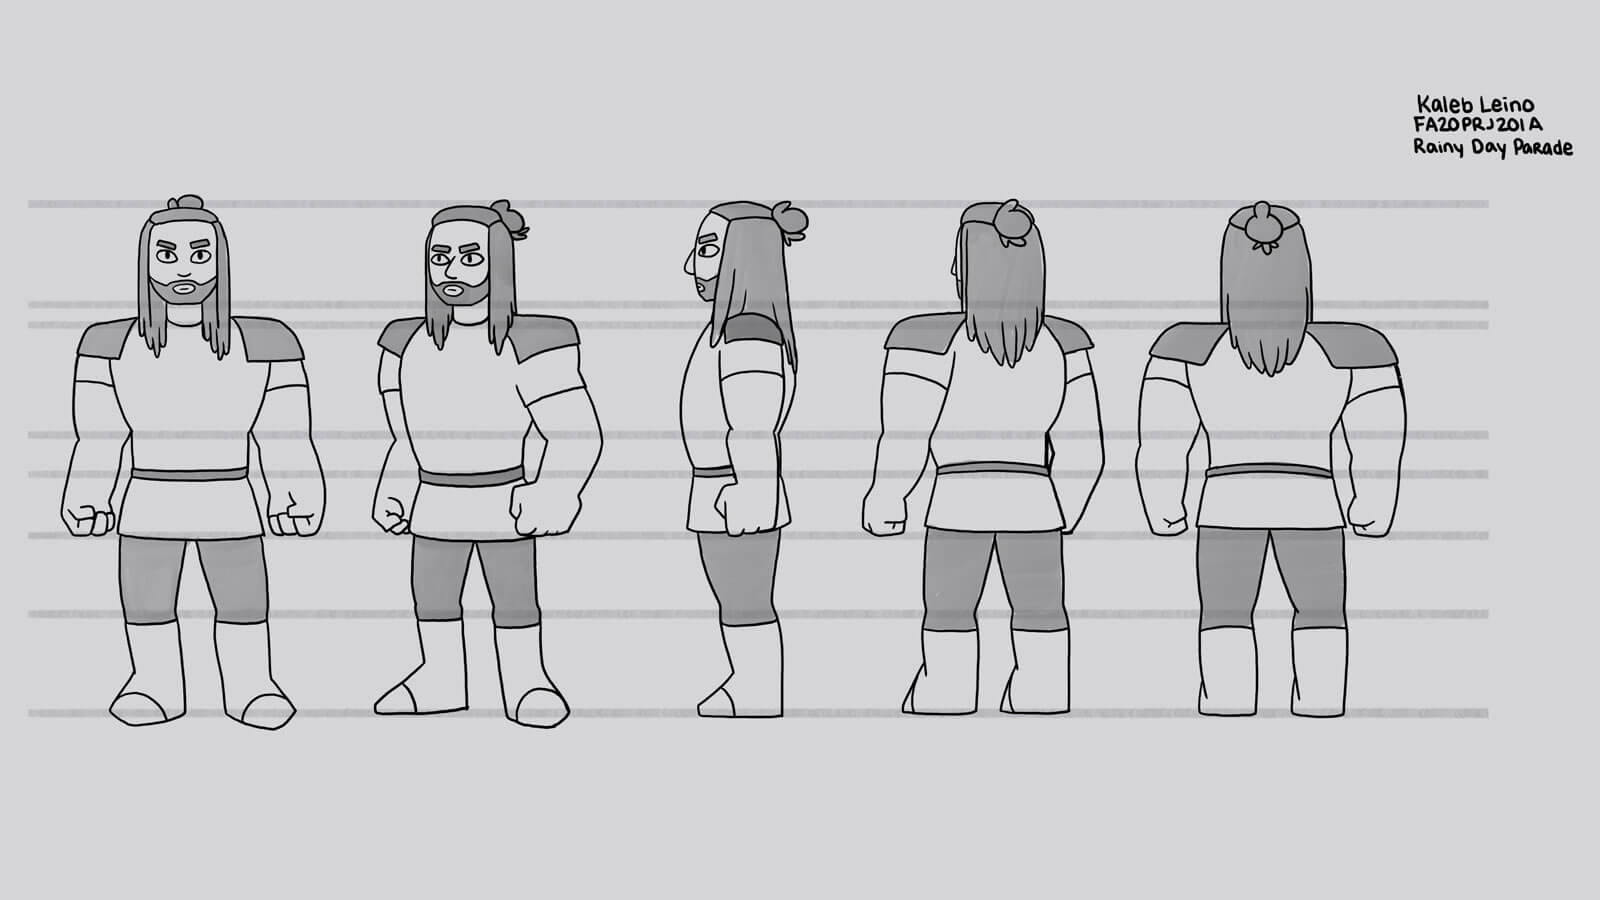 Sketch of a viking character shown a various angles